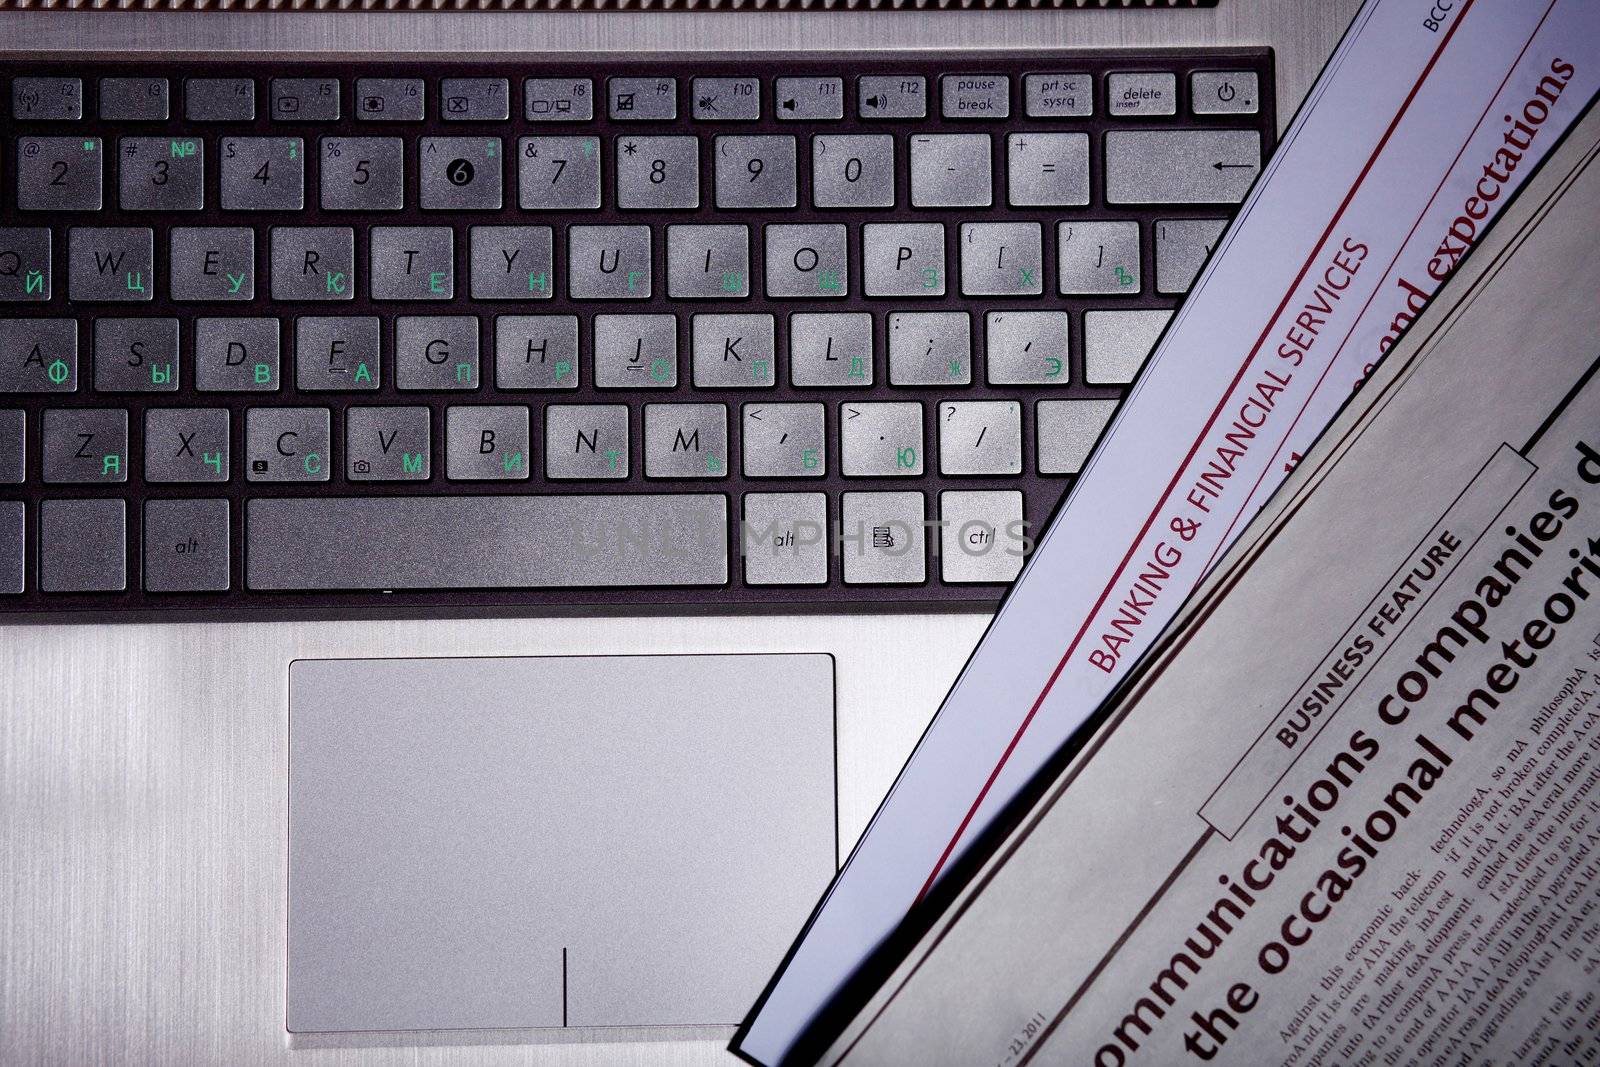 Notebook keyboard with a newspaper on it